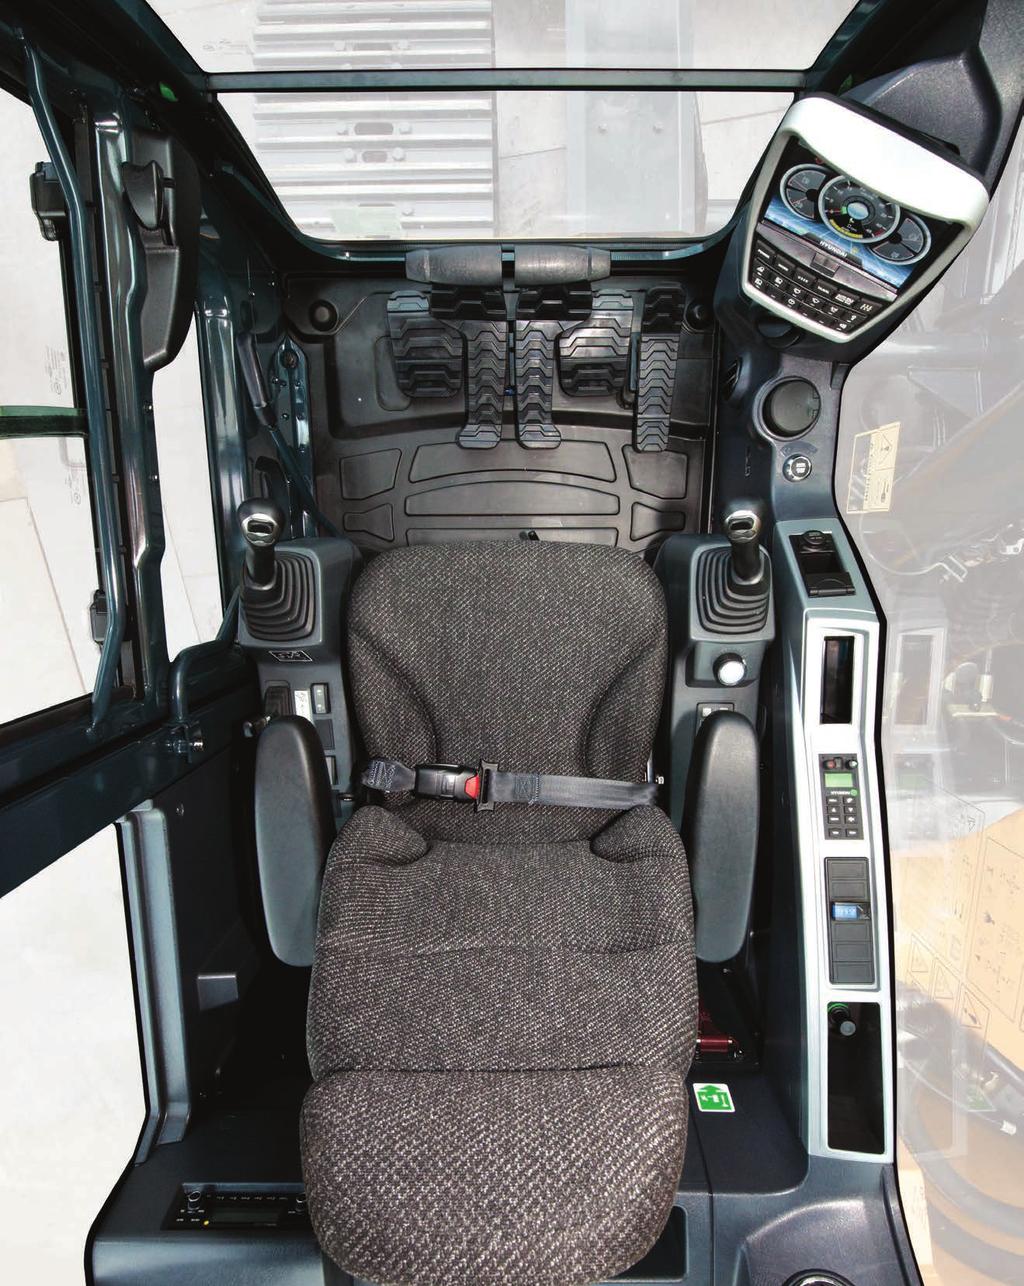 Spacious cab with ergonomic design for maximum operator productivity, convenience and comfort. * Pictured with some optional features.